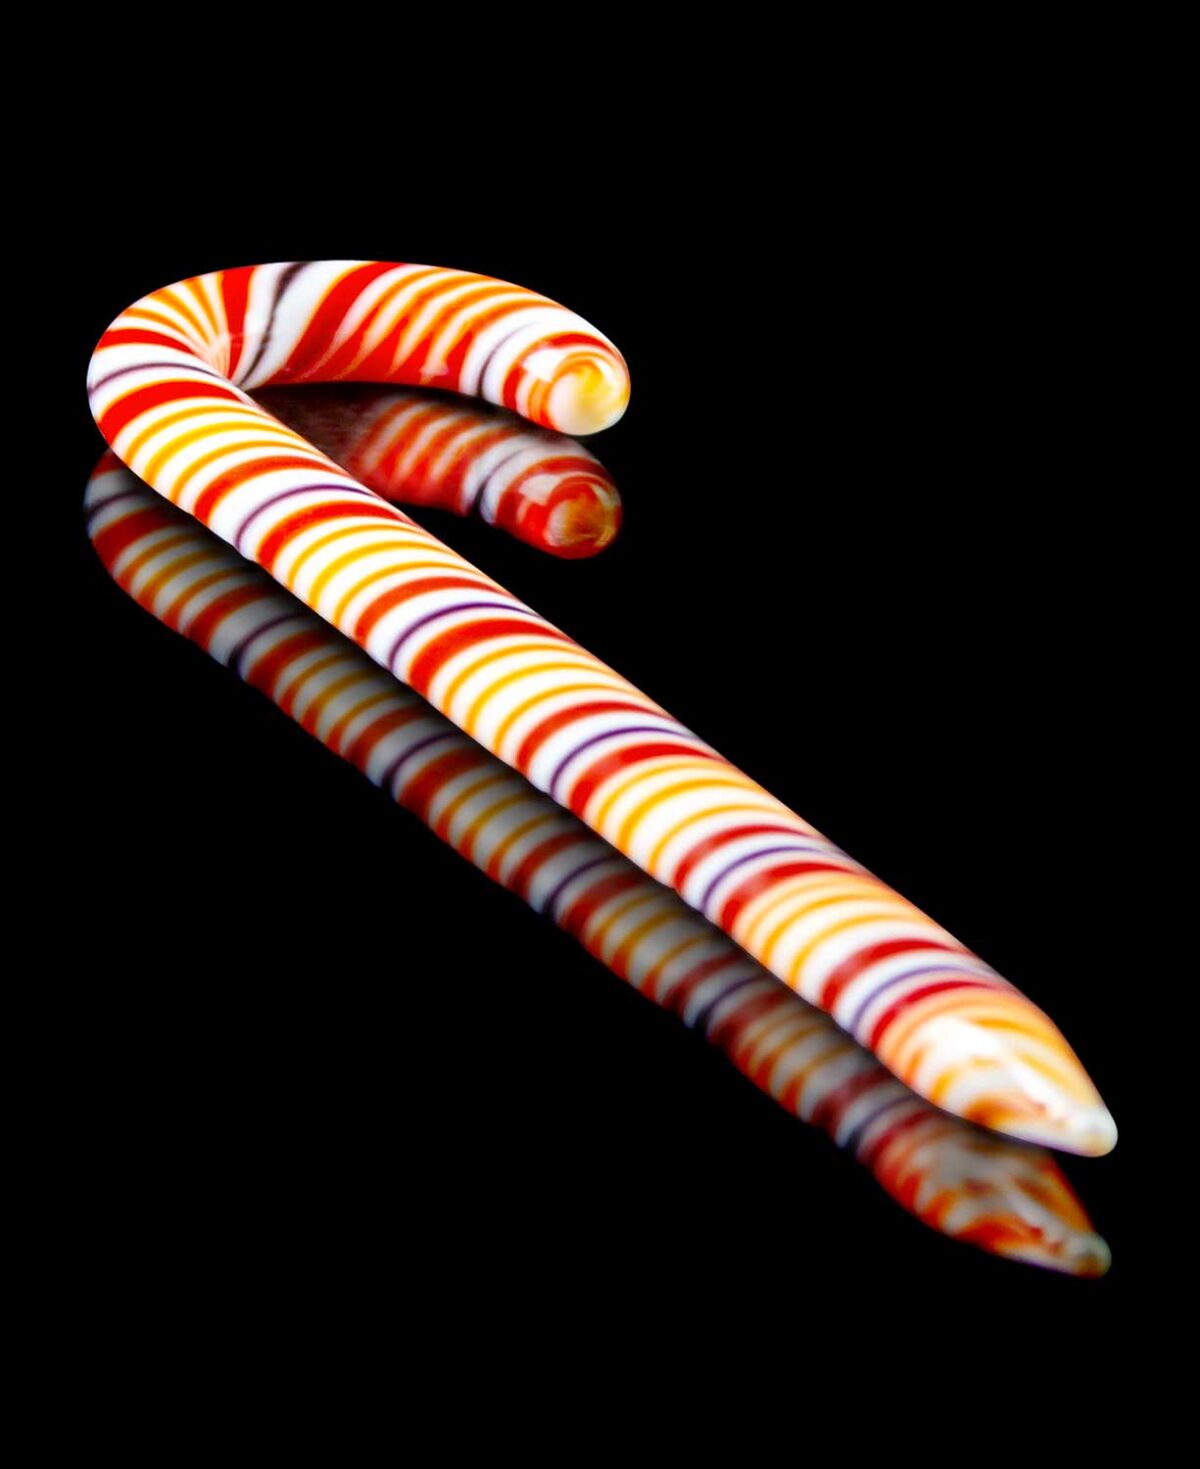 candy cane dab tool with pointed tip